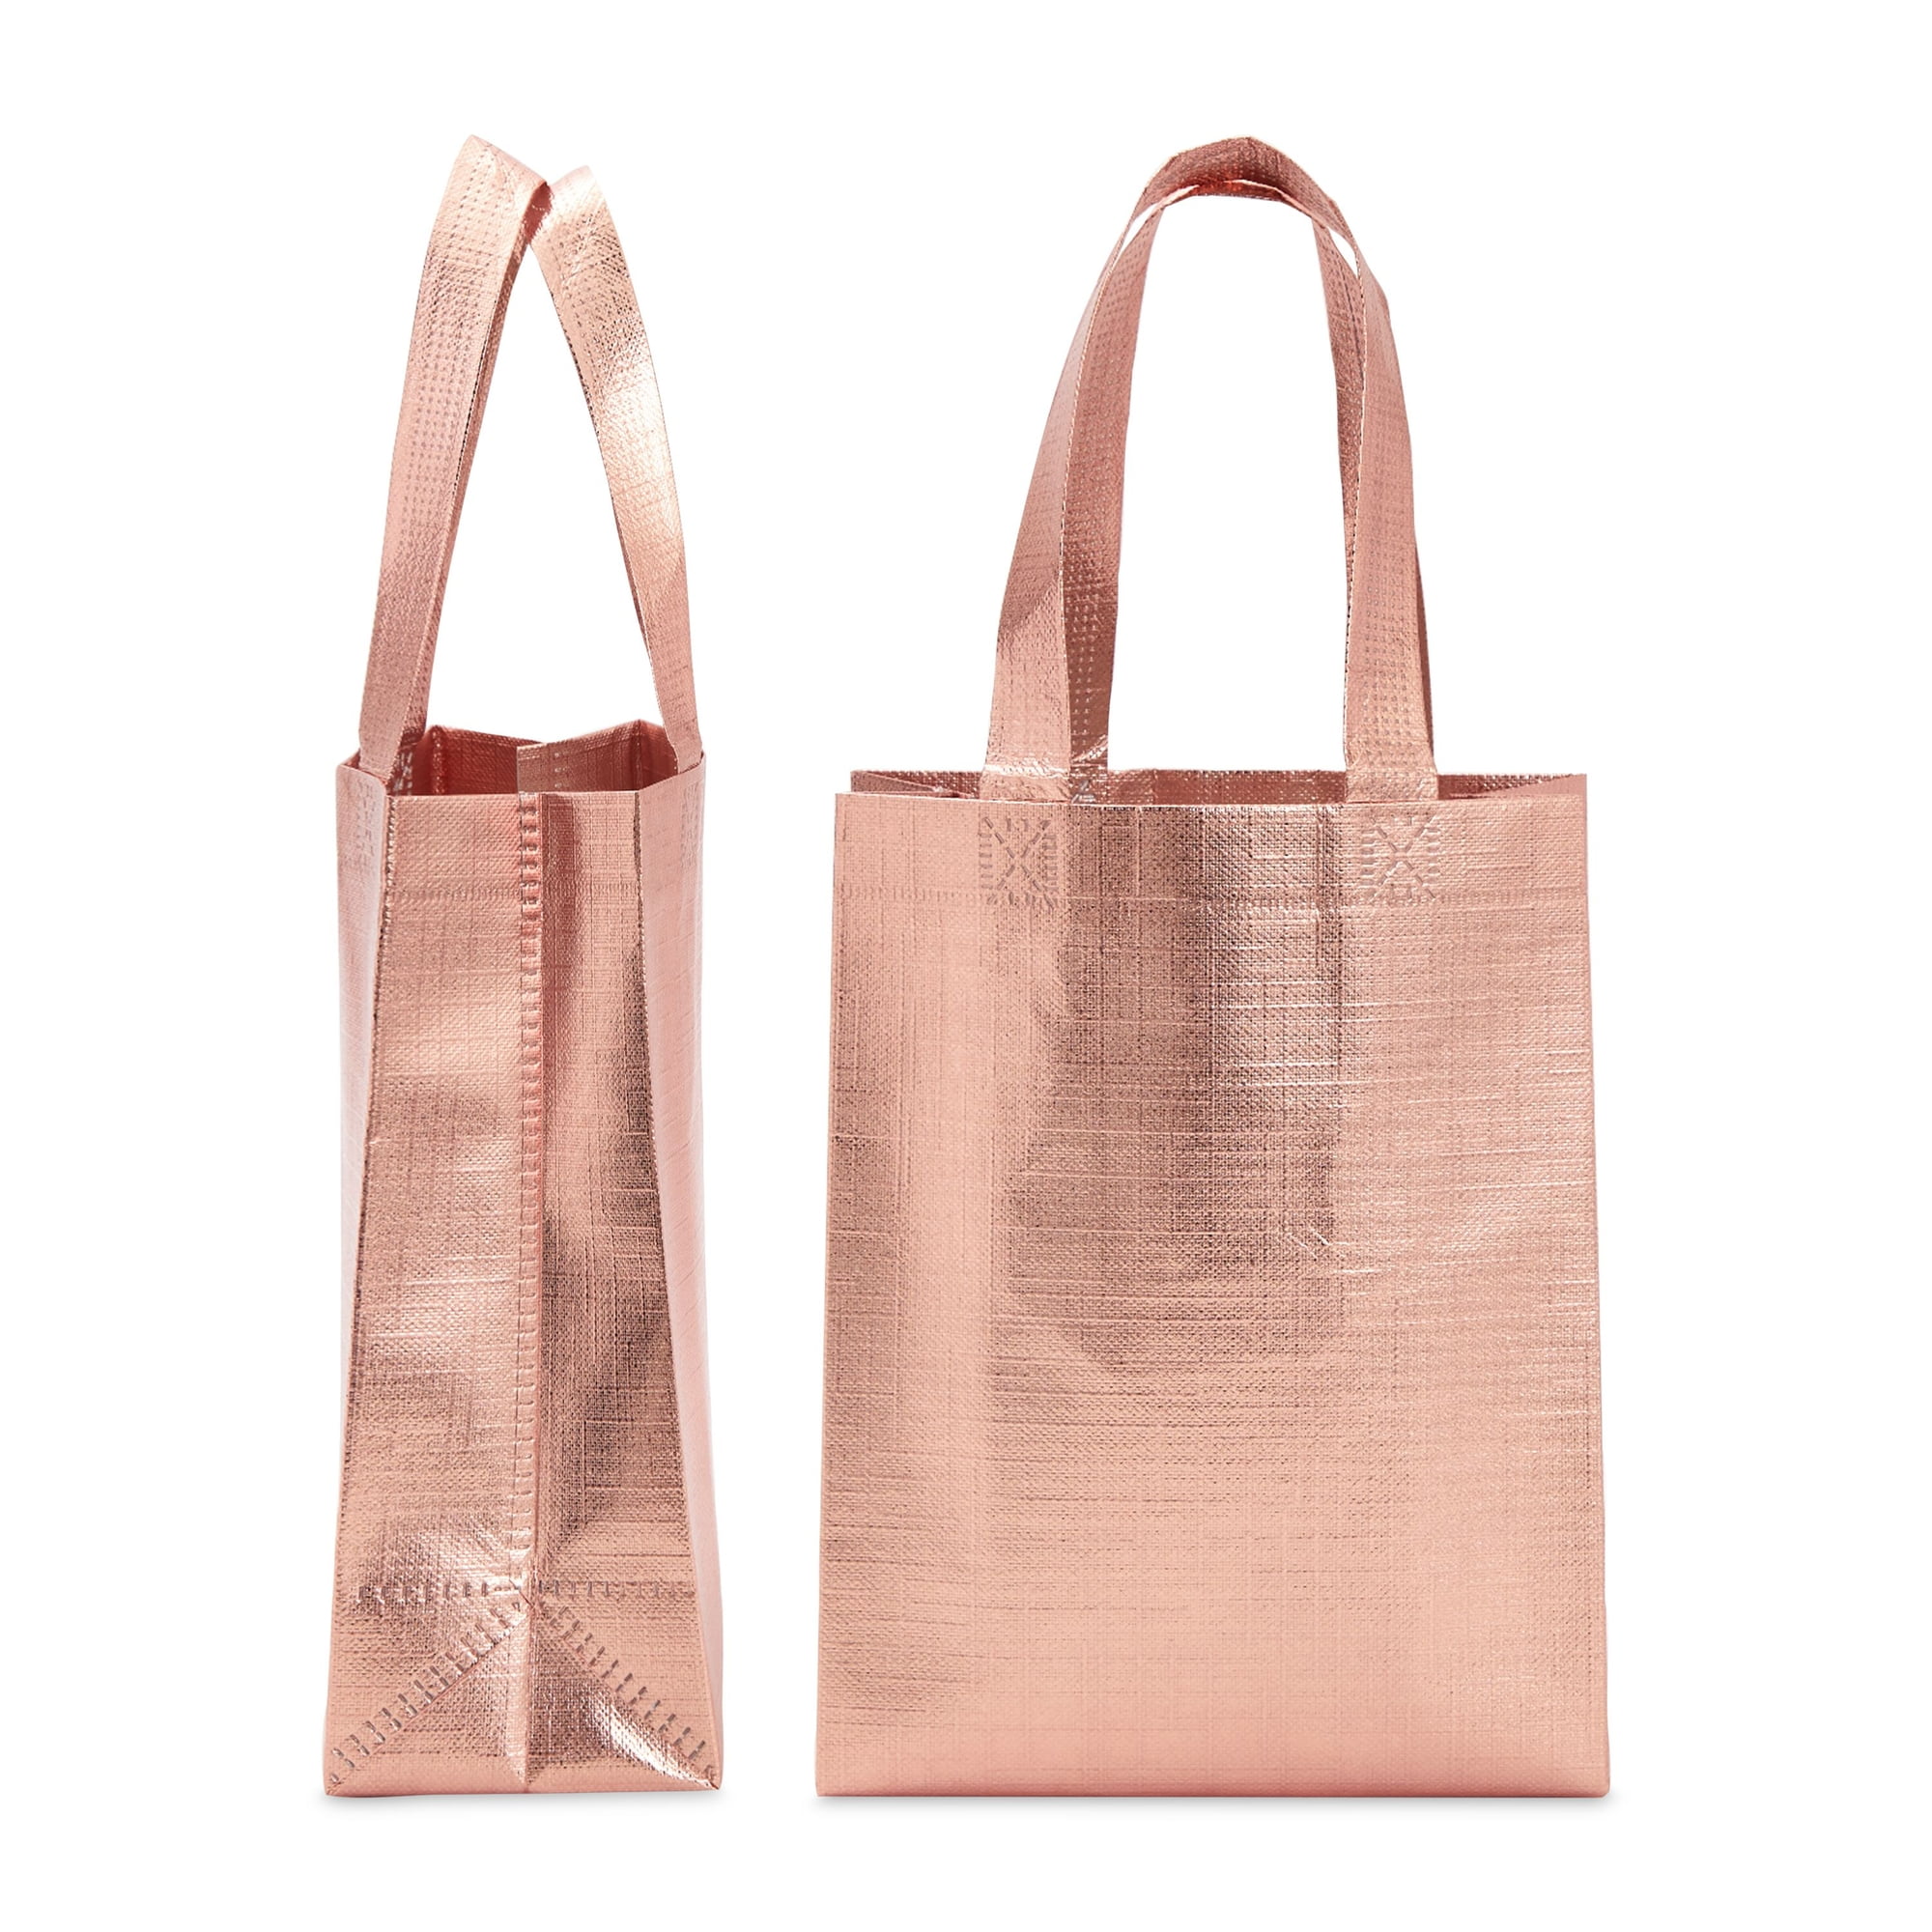 24 Pack Rose Gold Gift Bags with Handles, Large Non-Woven Reusable Grocery  Tote Bags (13.8 x 11.8 x 4.72 In)